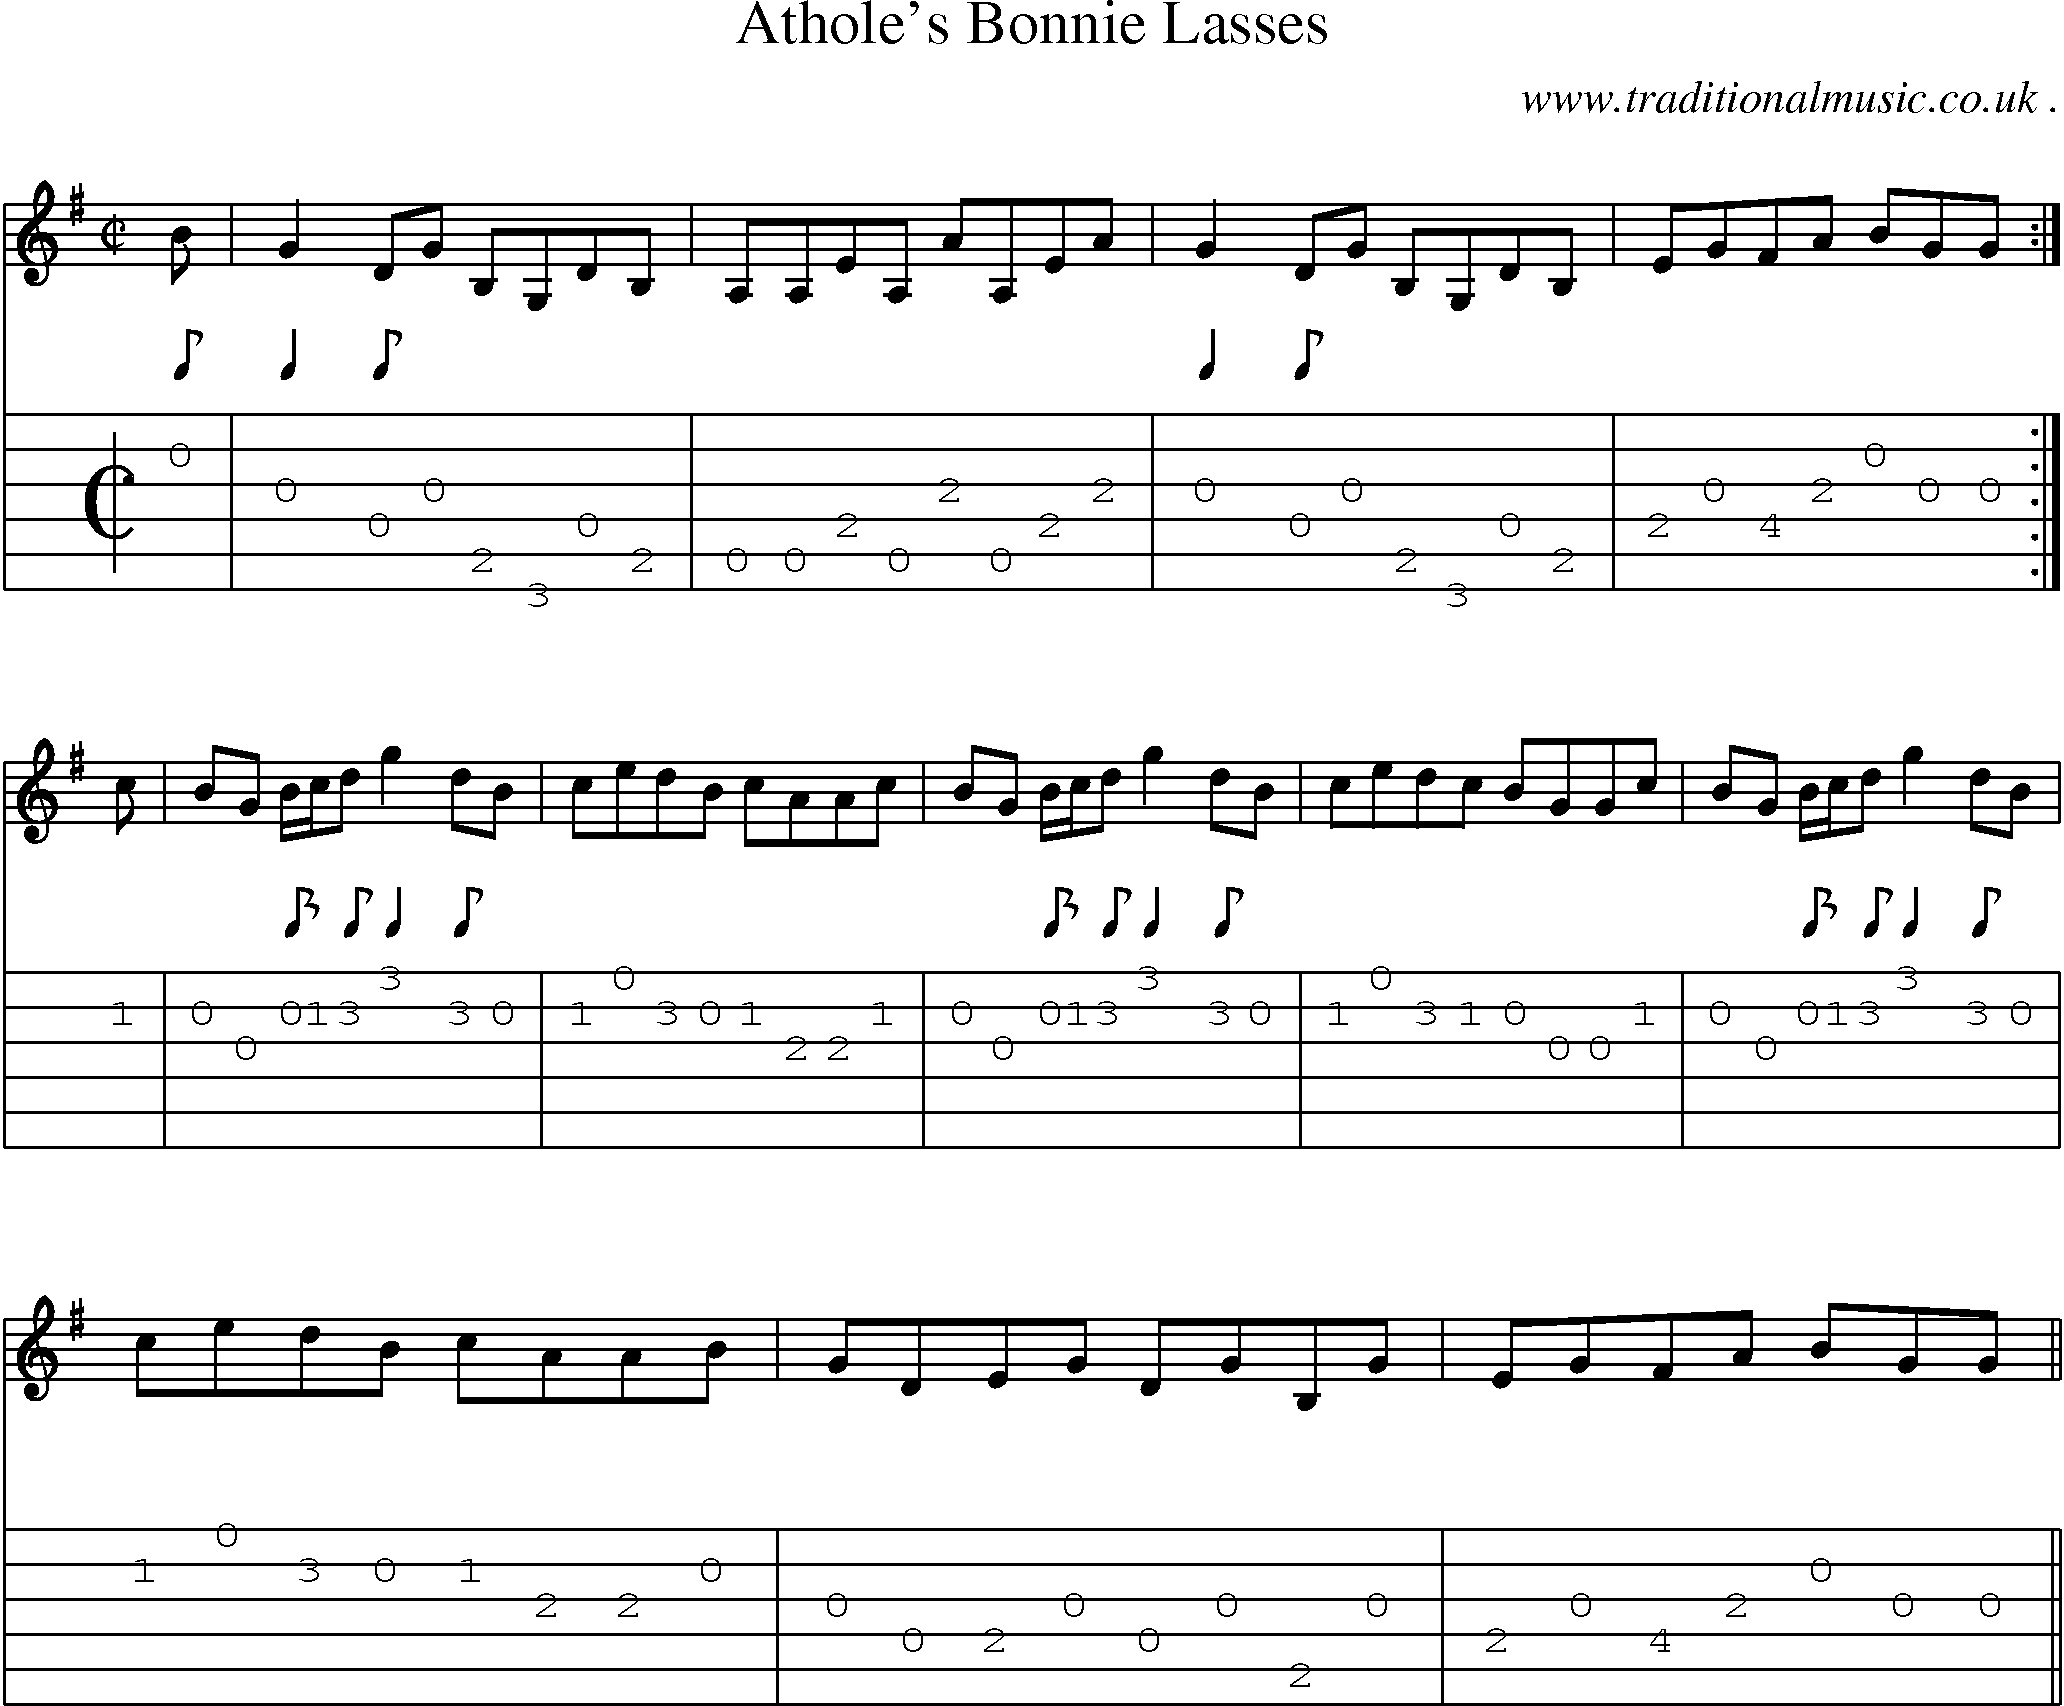 Sheet-music  score, Chords and Guitar Tabs for Atholes Bonnie Lasses